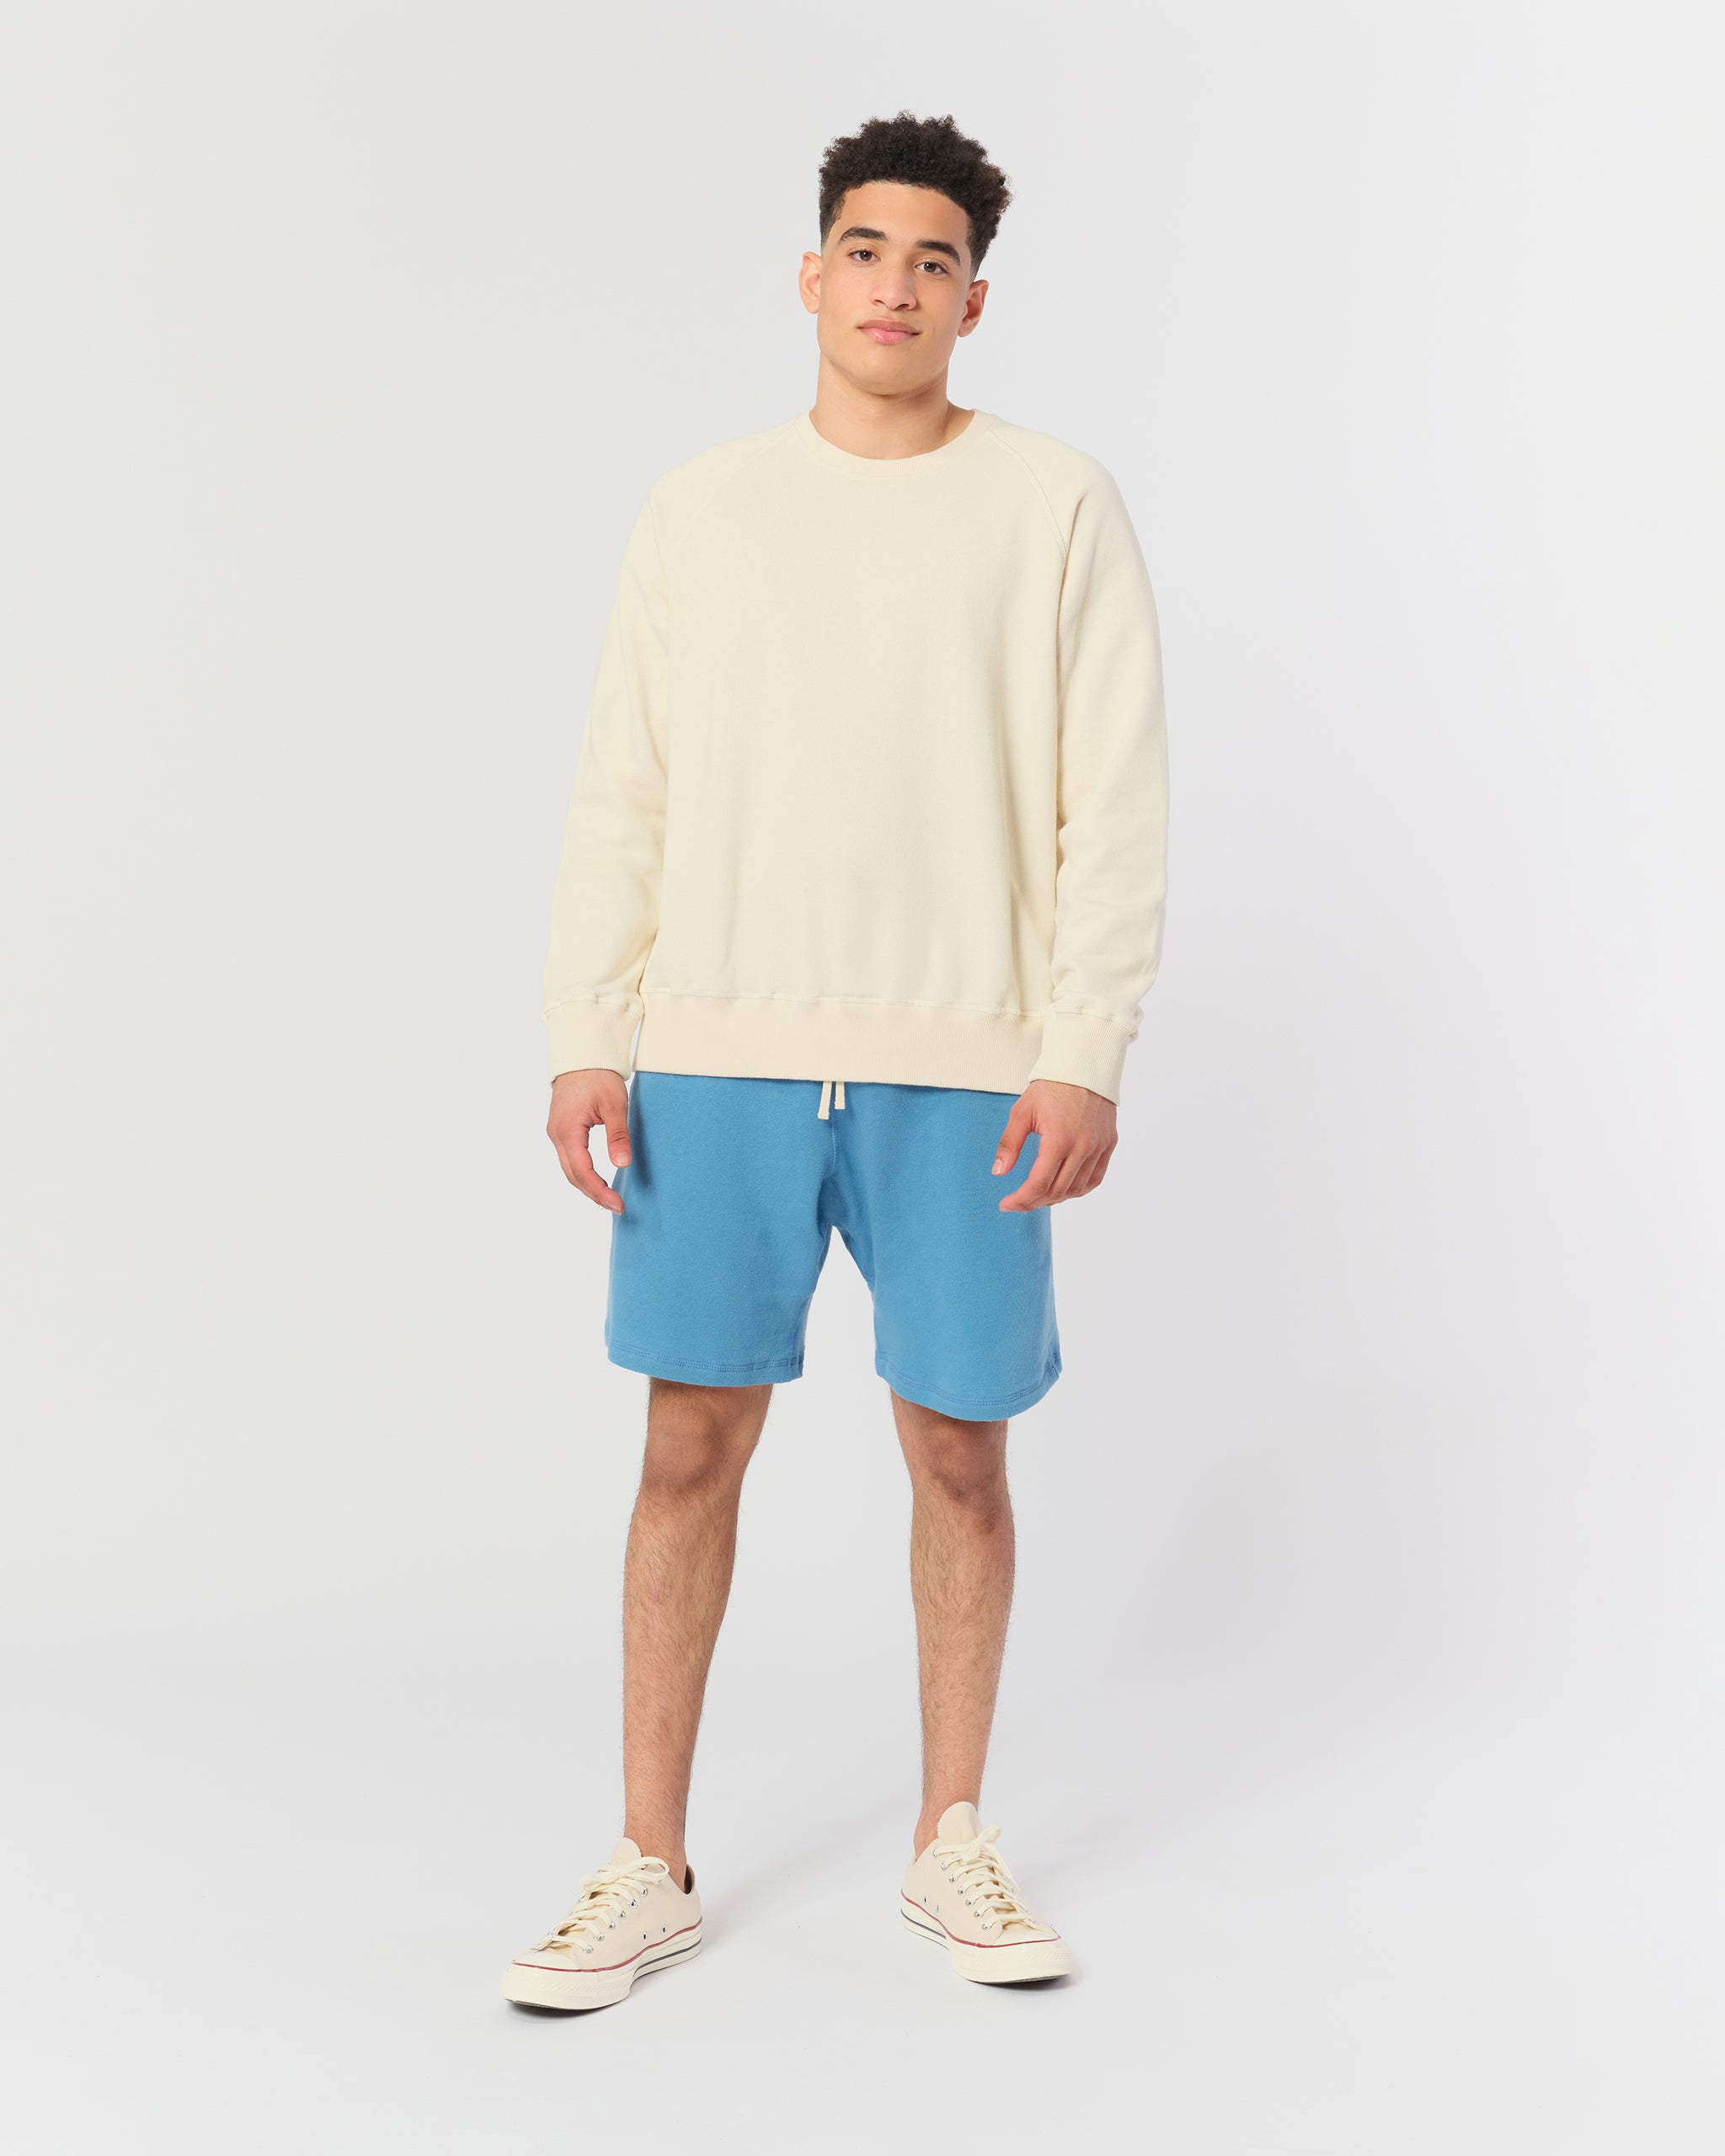 Solid Blue French Terry Cotton Sweat Shorts Shot on Model